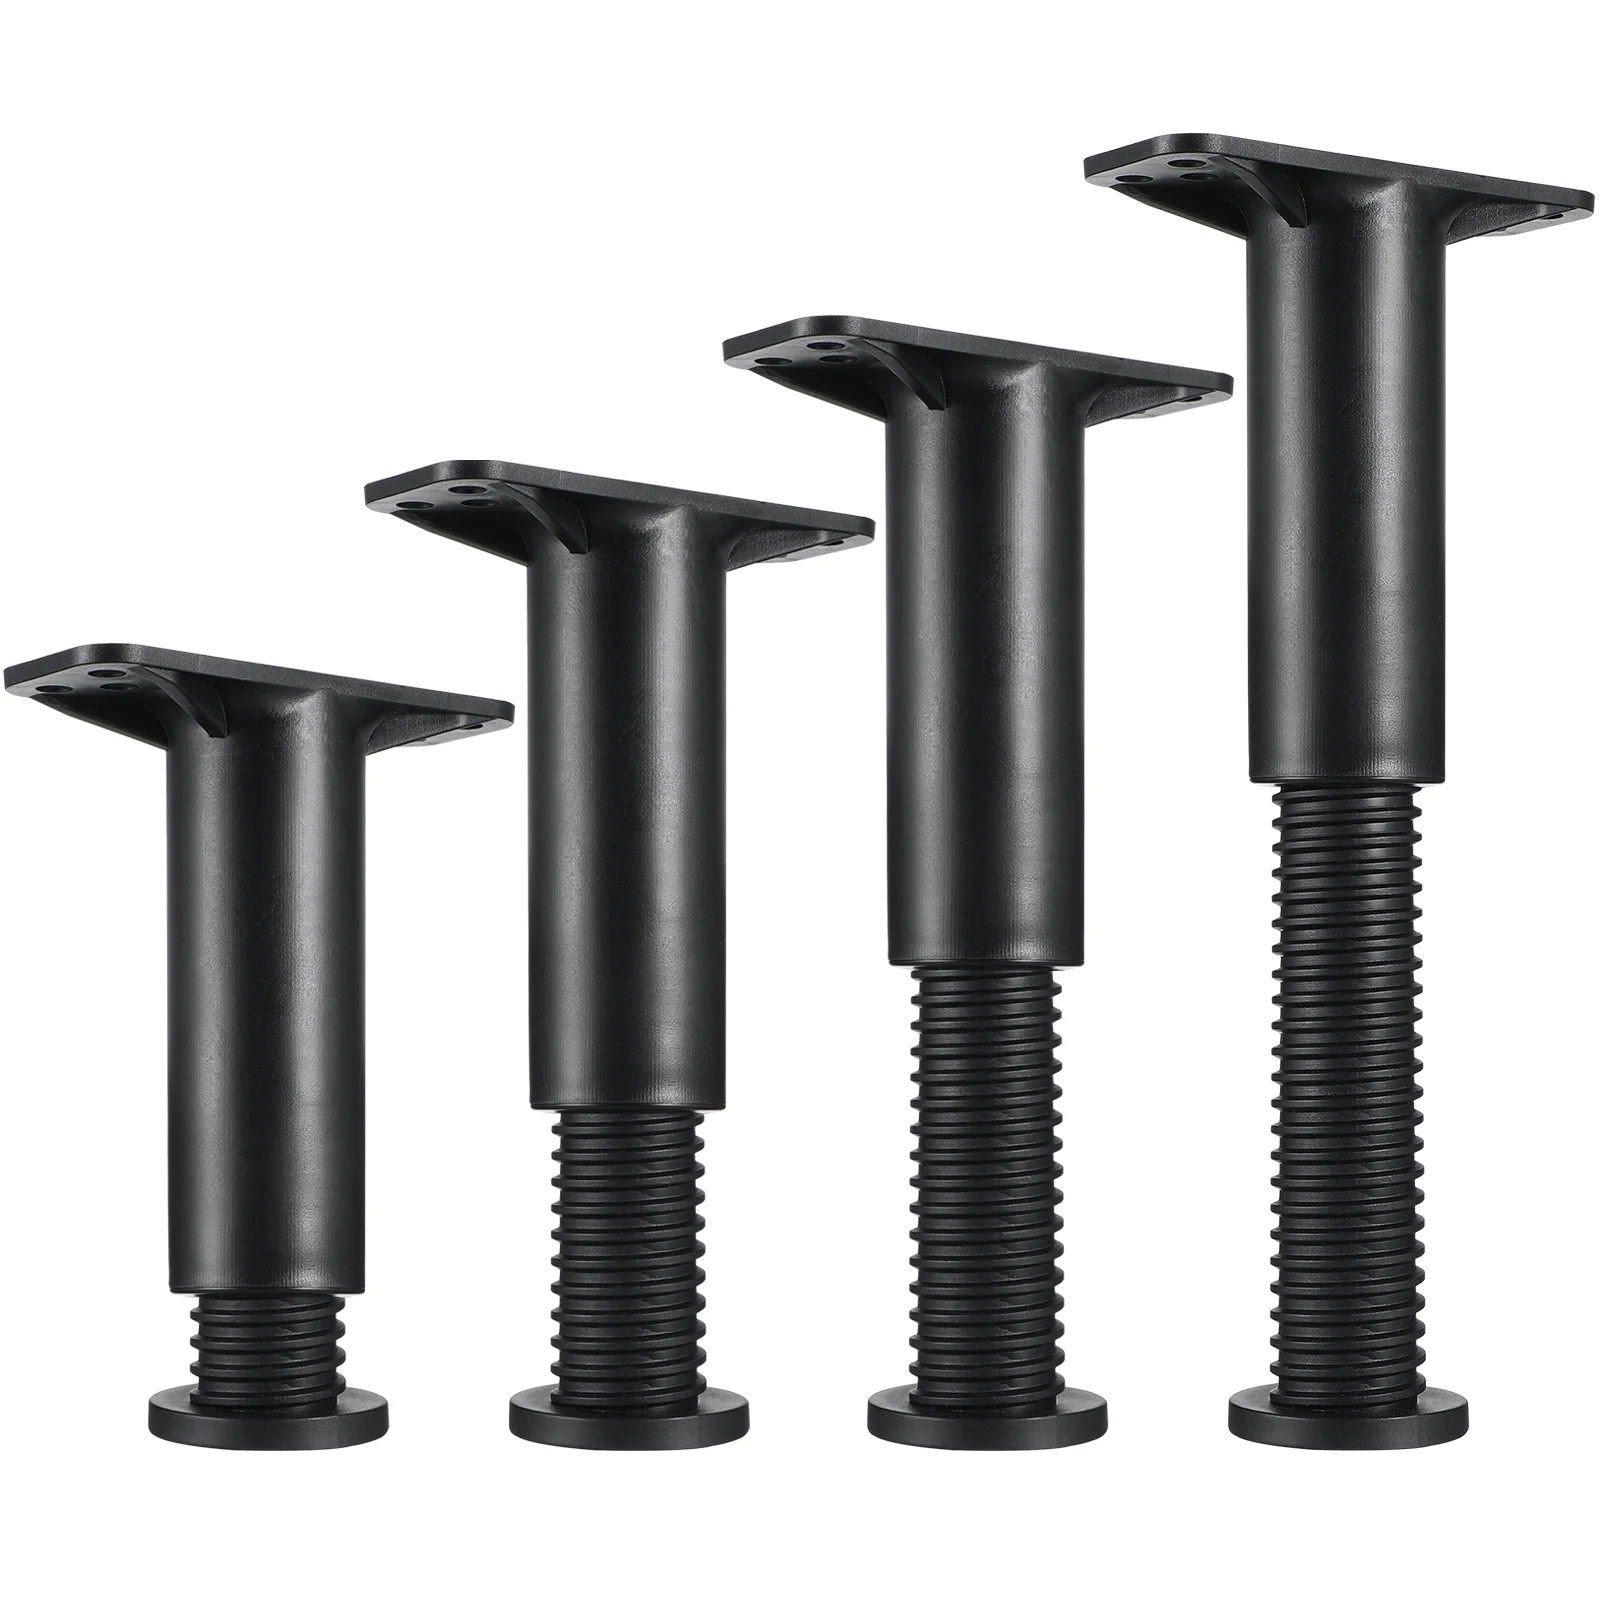 

4 Pcs Bed Support Frame Adjustable Height Leg Replacement Center Plastic Steel Legs Furniture